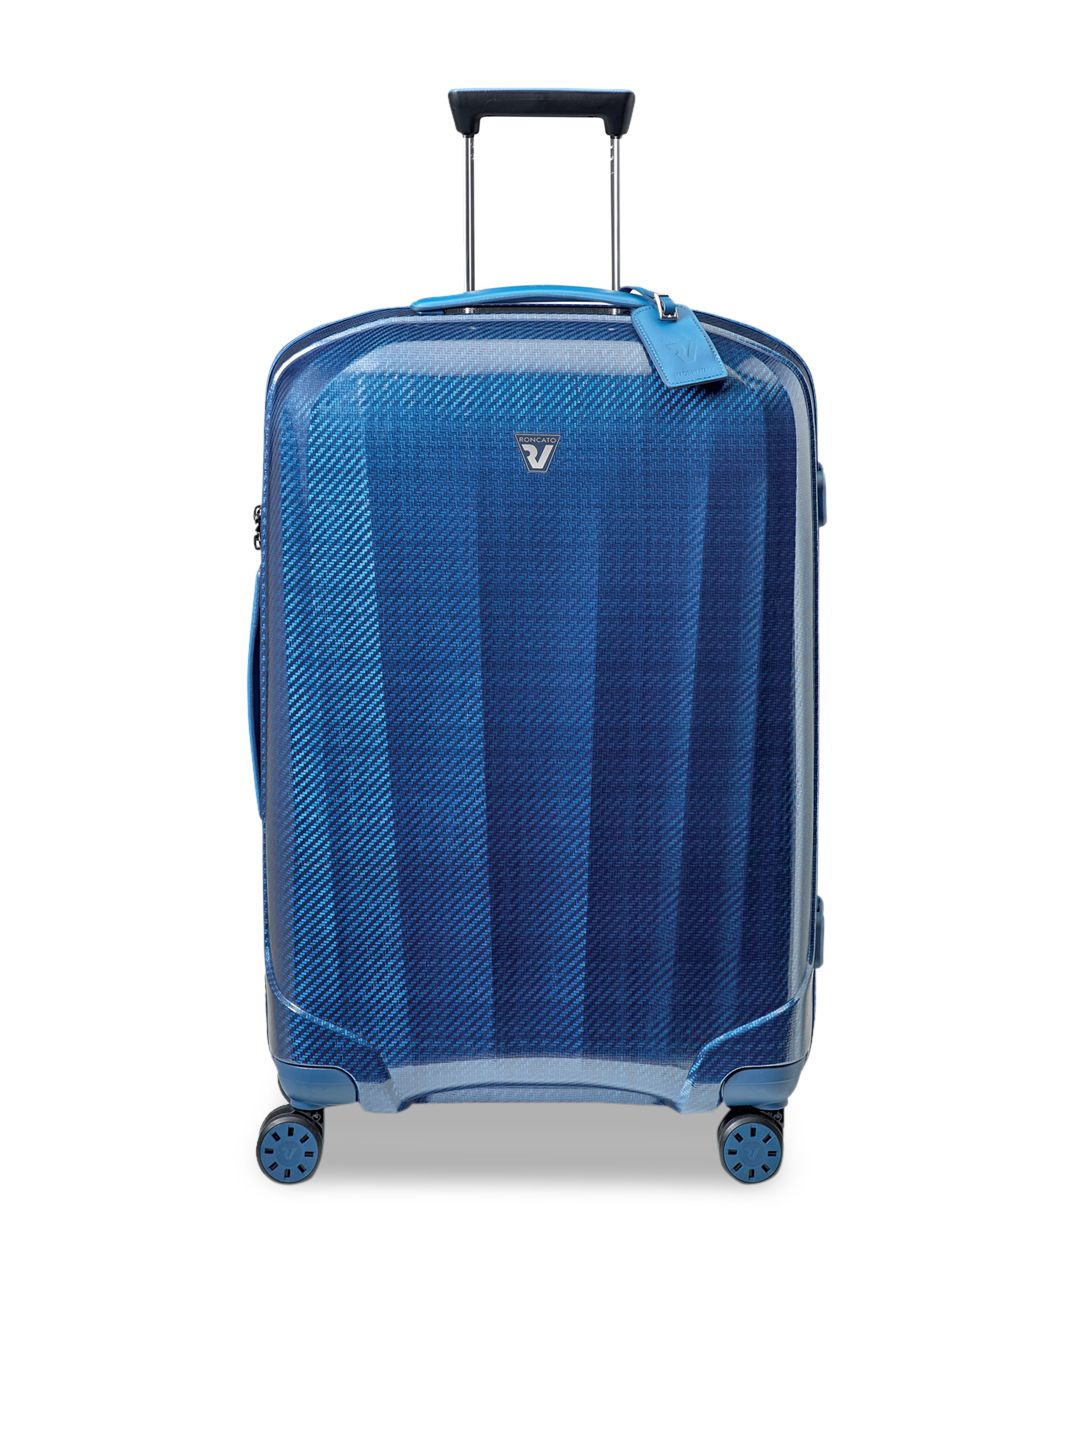 RONCATO Unisex Blue Solid 360-Degree Rotation Hard-Sided Medium Trolley Suitcase Price in India